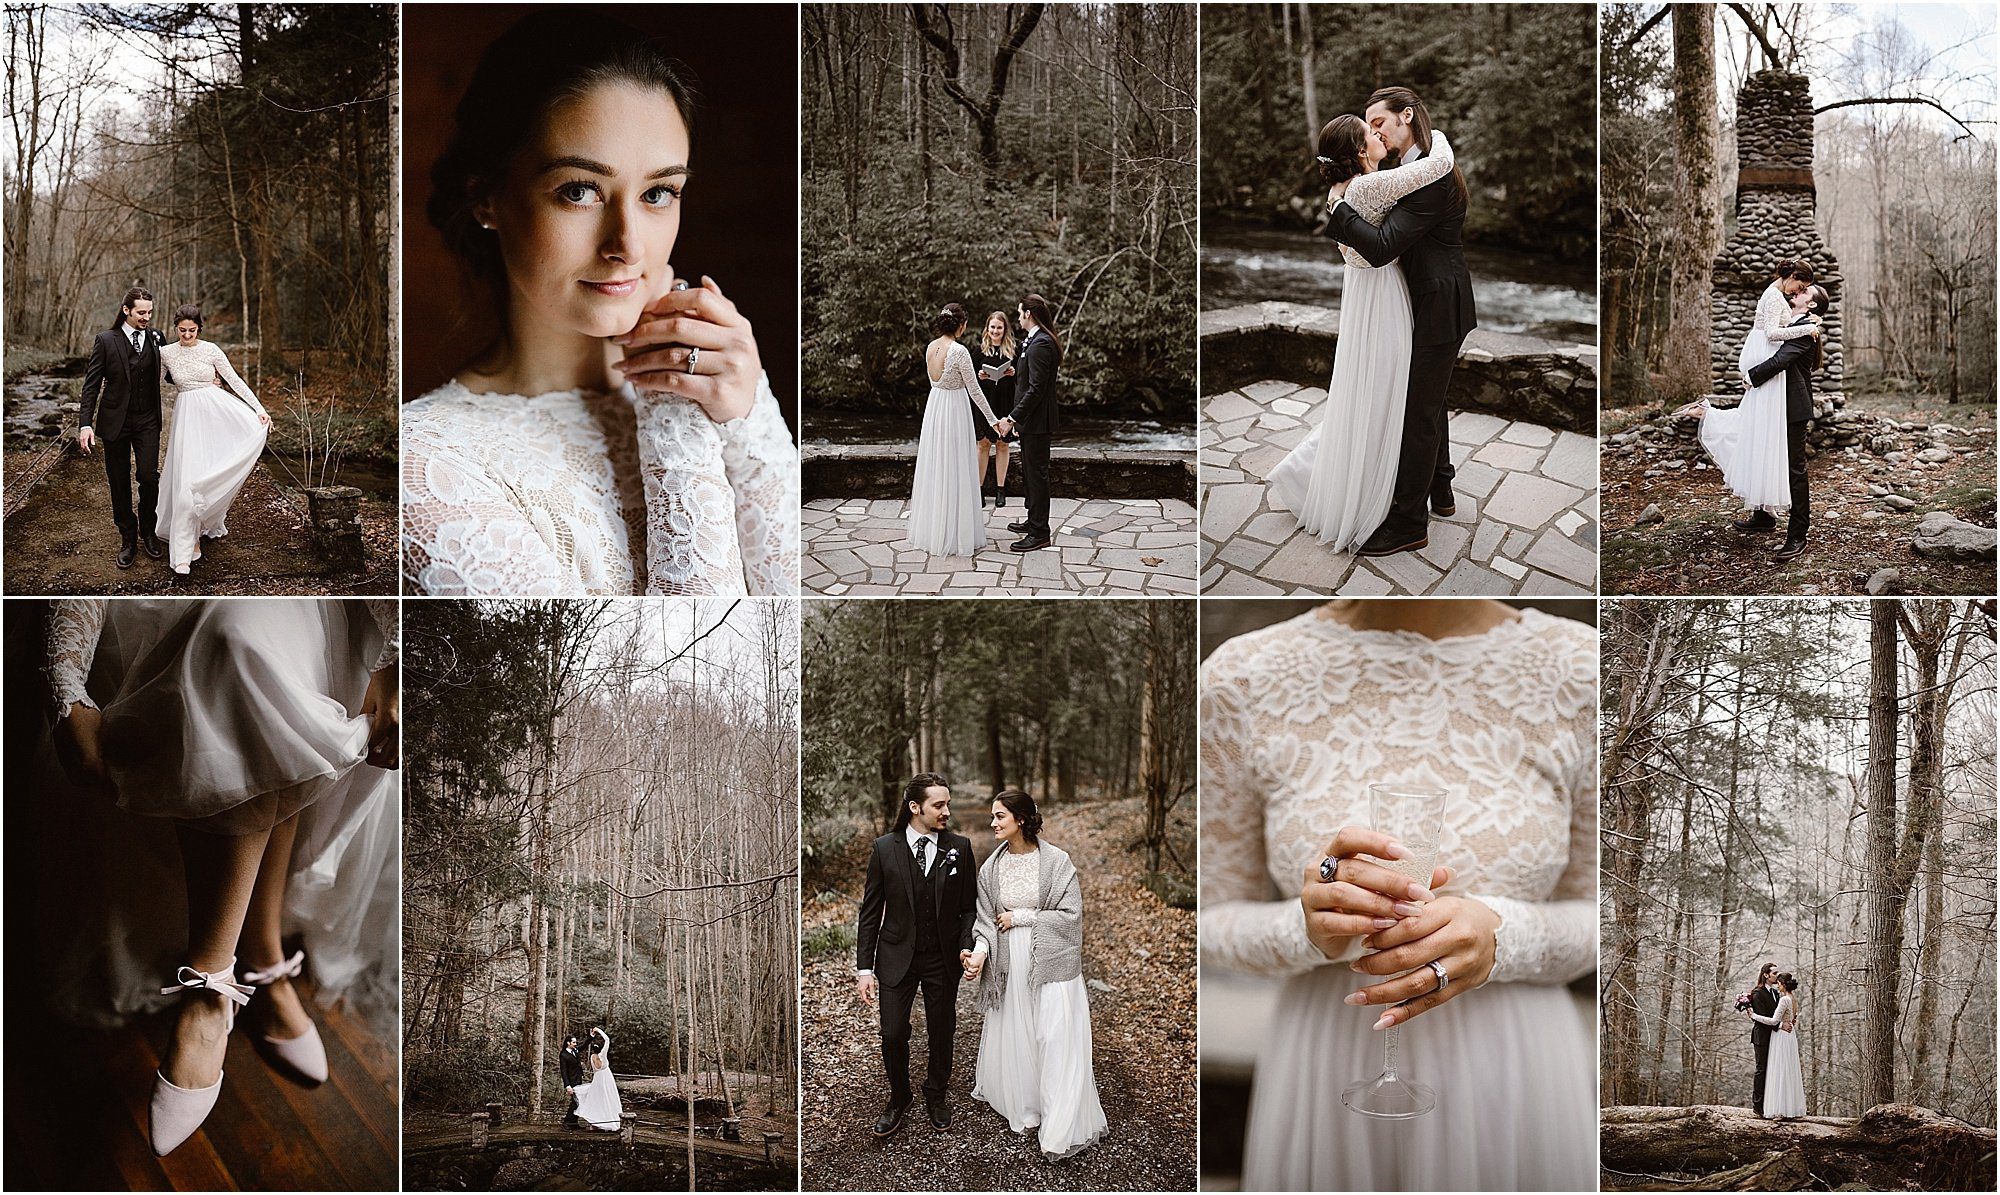 Intimate Smoky Mountain Elopement at Spence Cabin in Elkmont